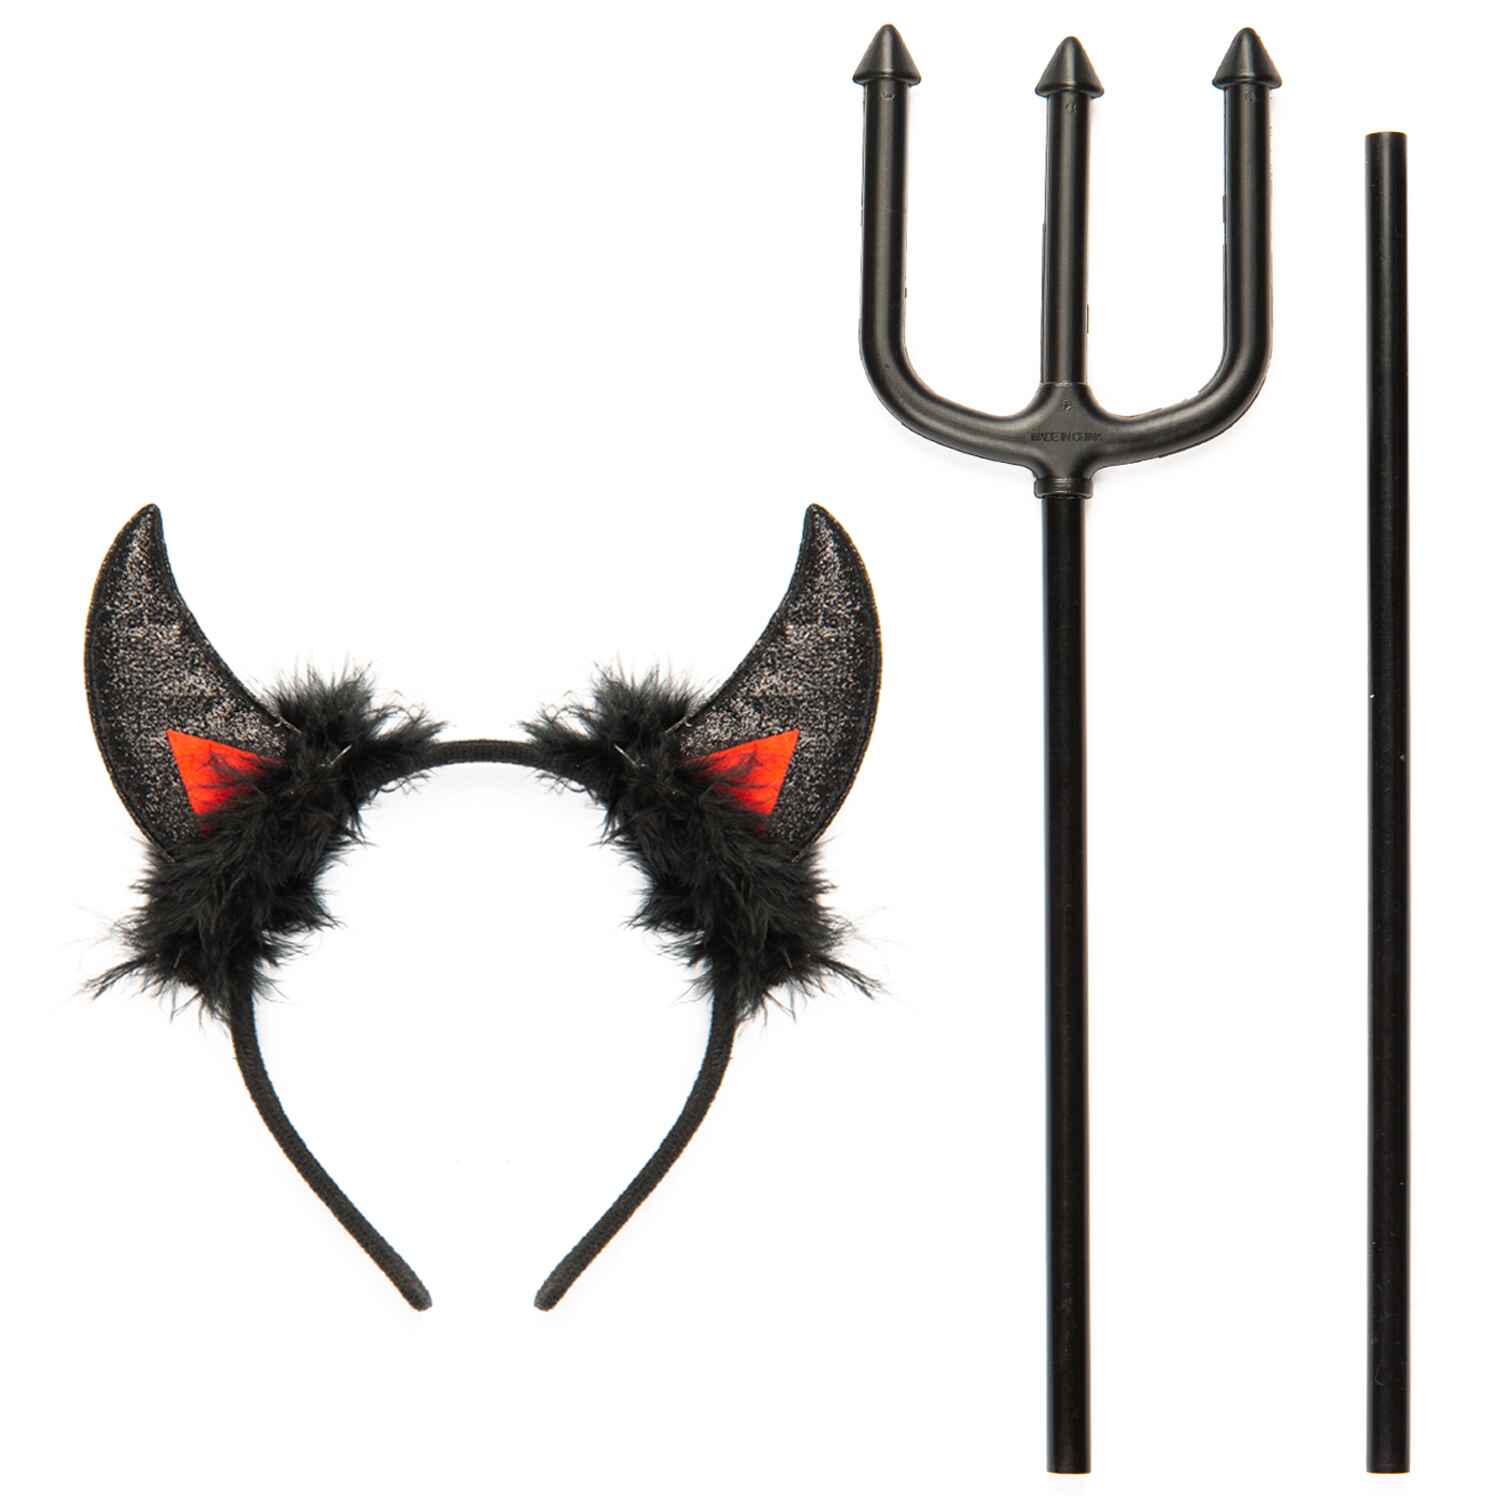 Halloween Fancy Devil Cosplay Outfit Accessories for Women, Men and Kids (Black)